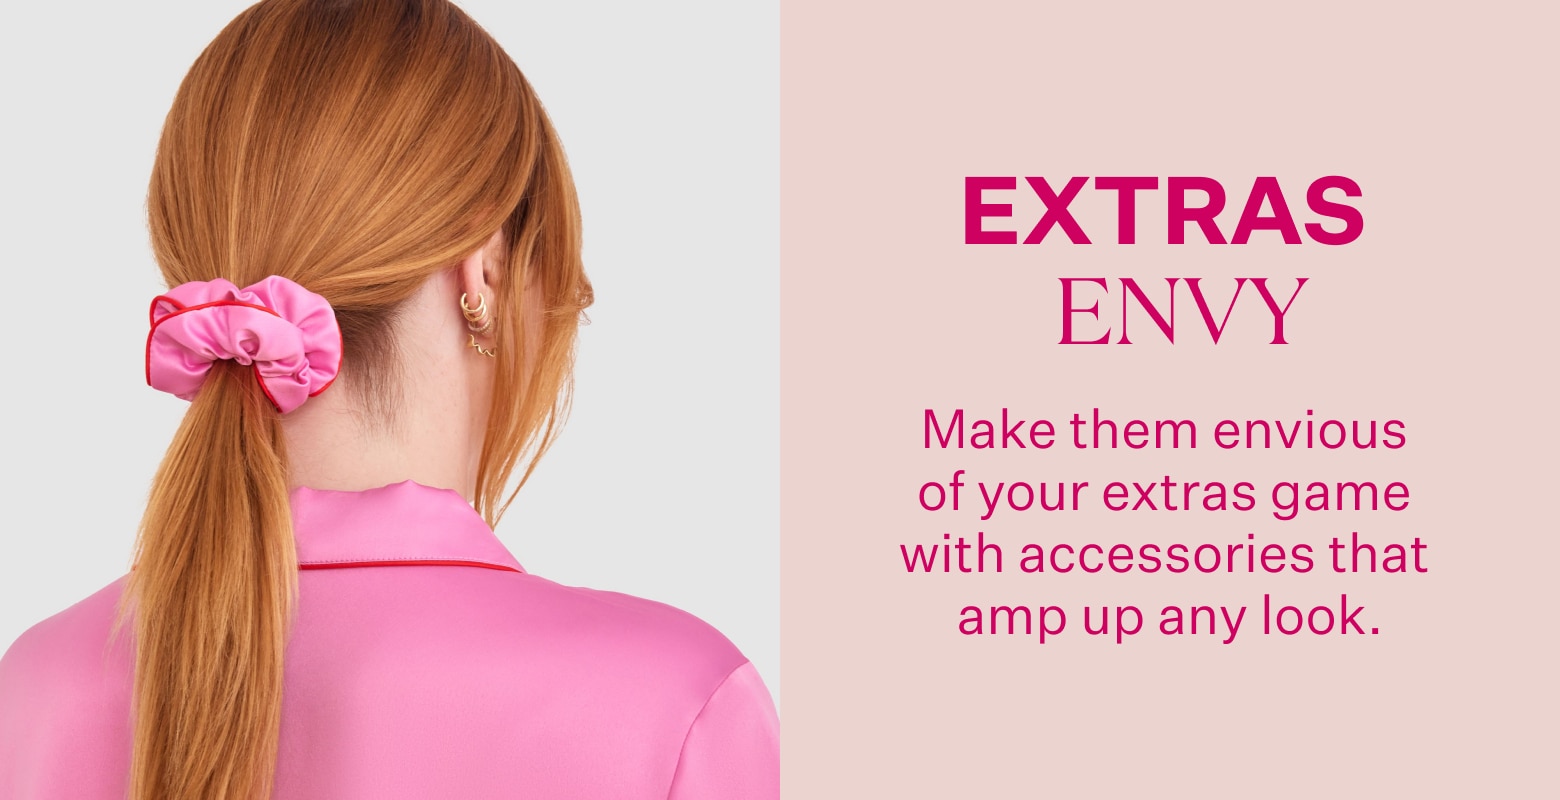 Make them envious of your extras game with accessories that amp up any look.